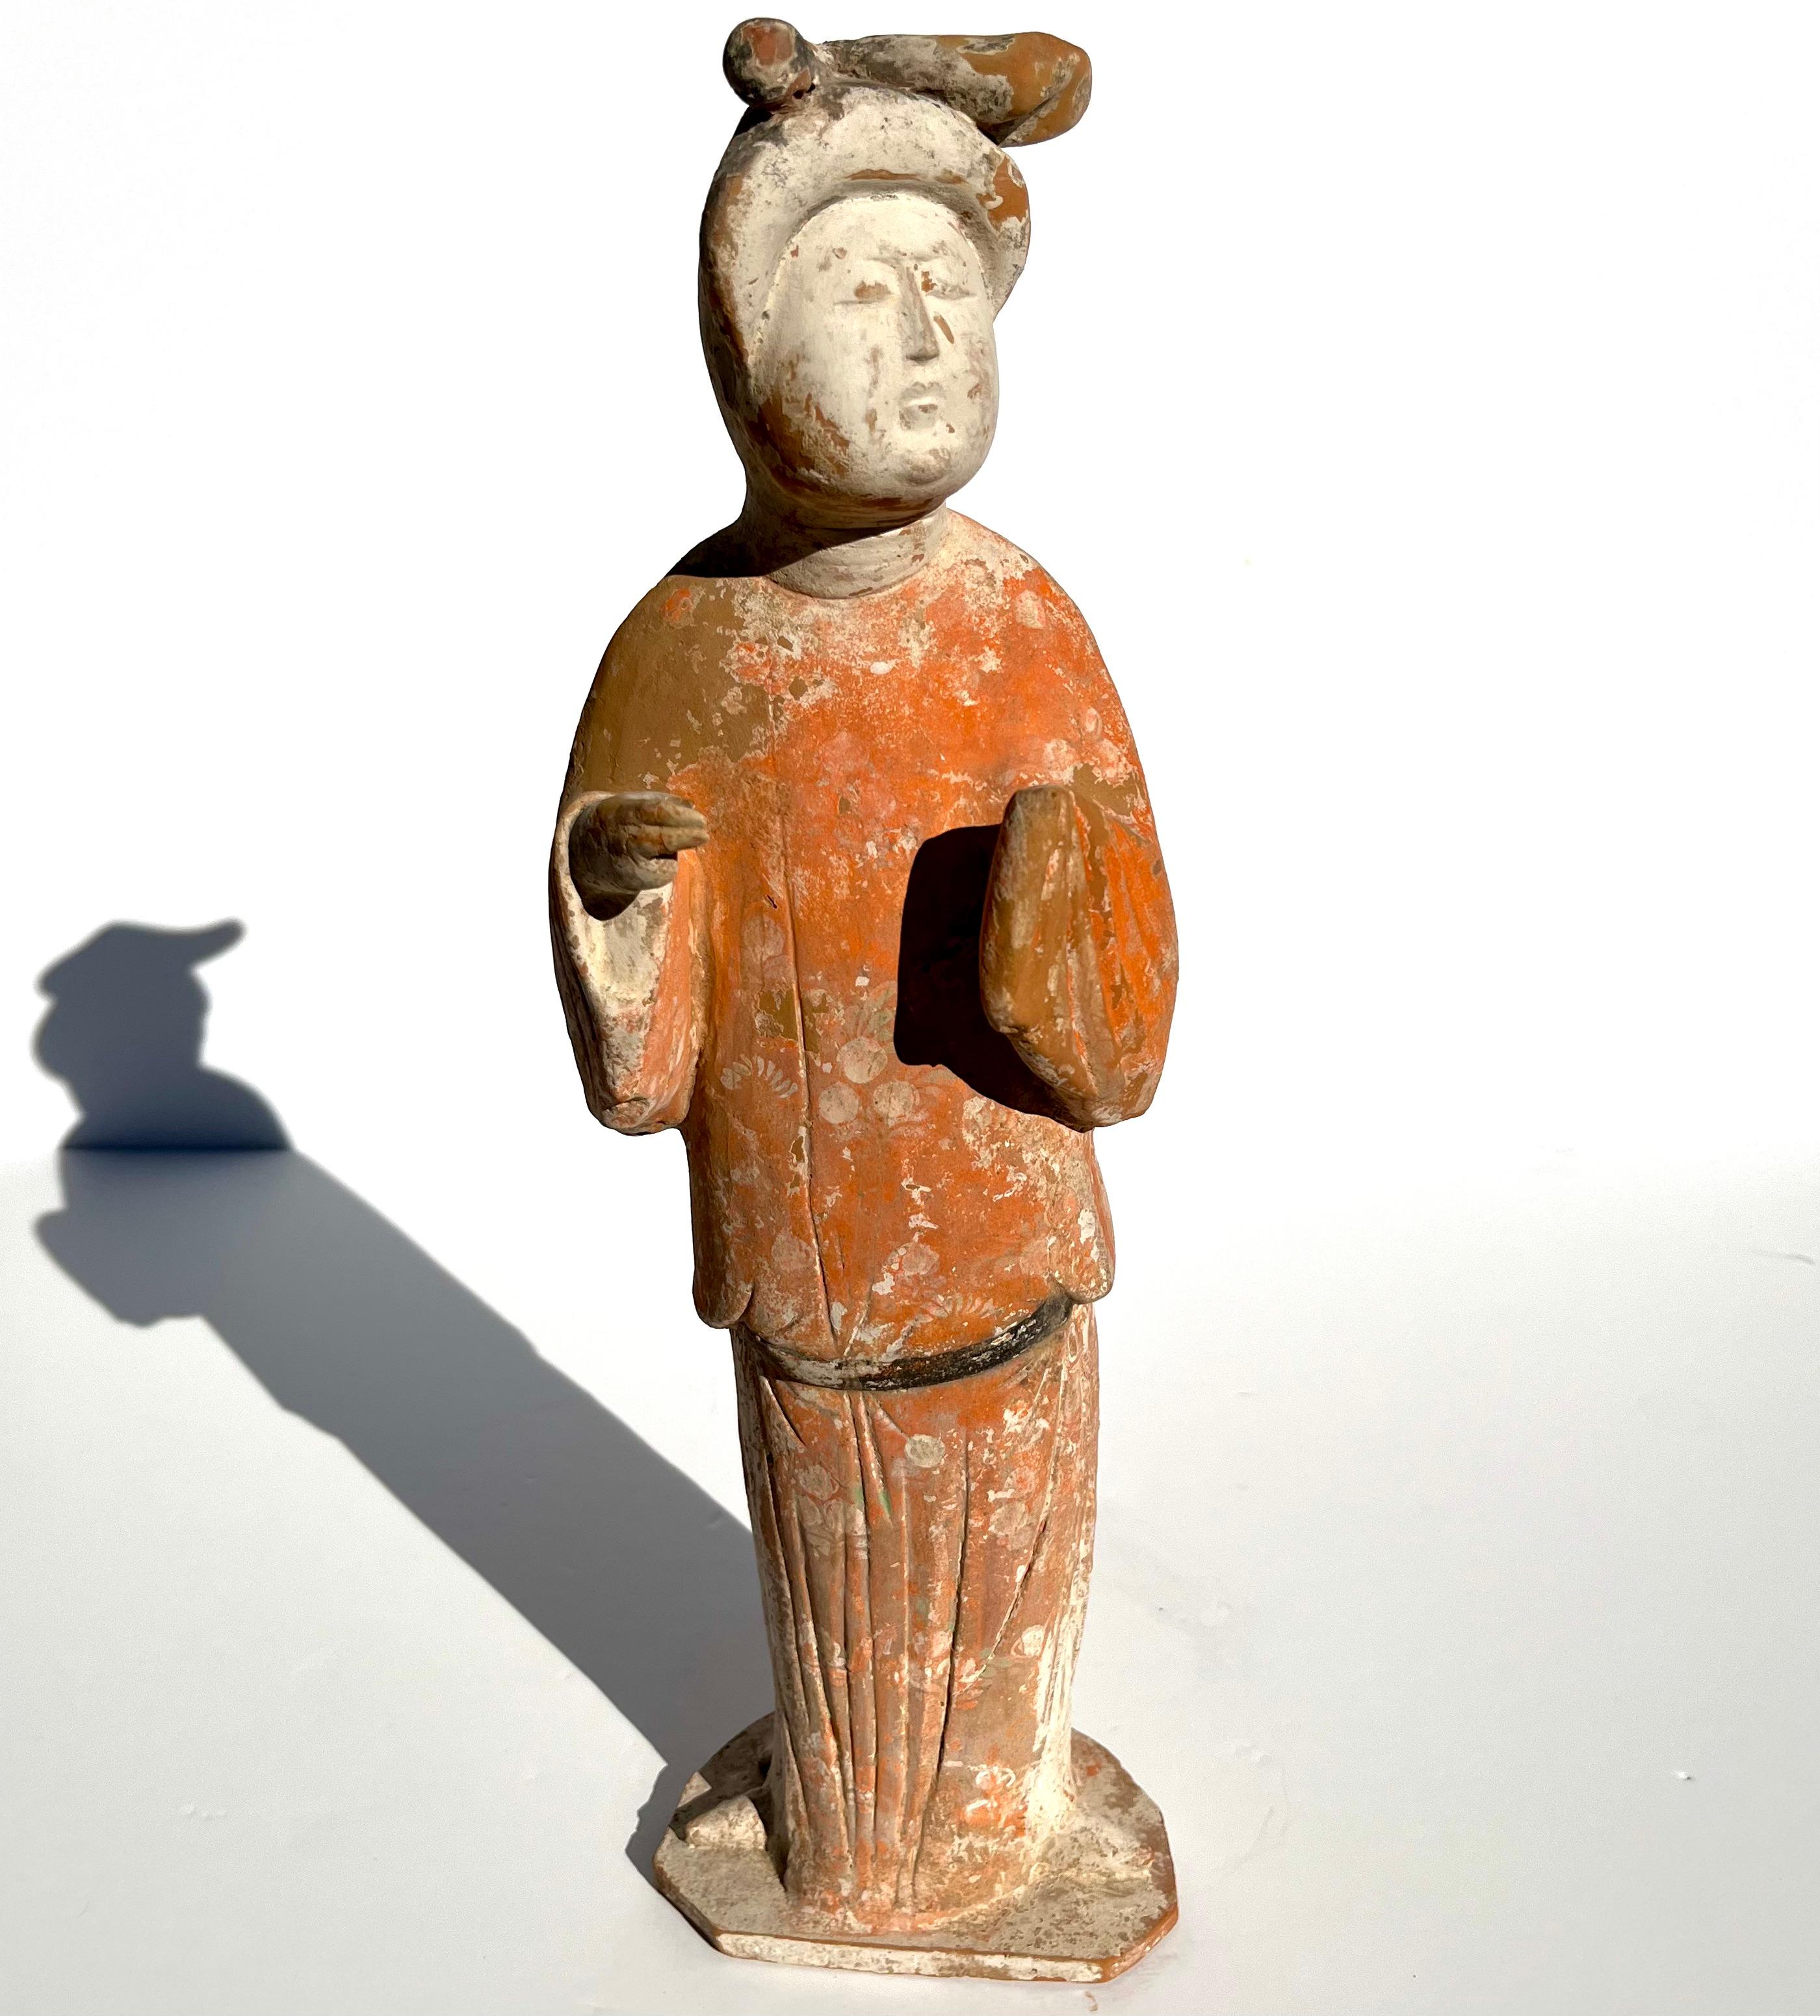 Tang Dynasty Painted Pottery Figure of a Fat Lady or Female Courtesan.
Period (618 - 907AD)

Estate / Collection: The Collection of Jay I. Kislak sold to benefit the Kislak Family Foundation

A painted pottery fat lady in orange an white robe with